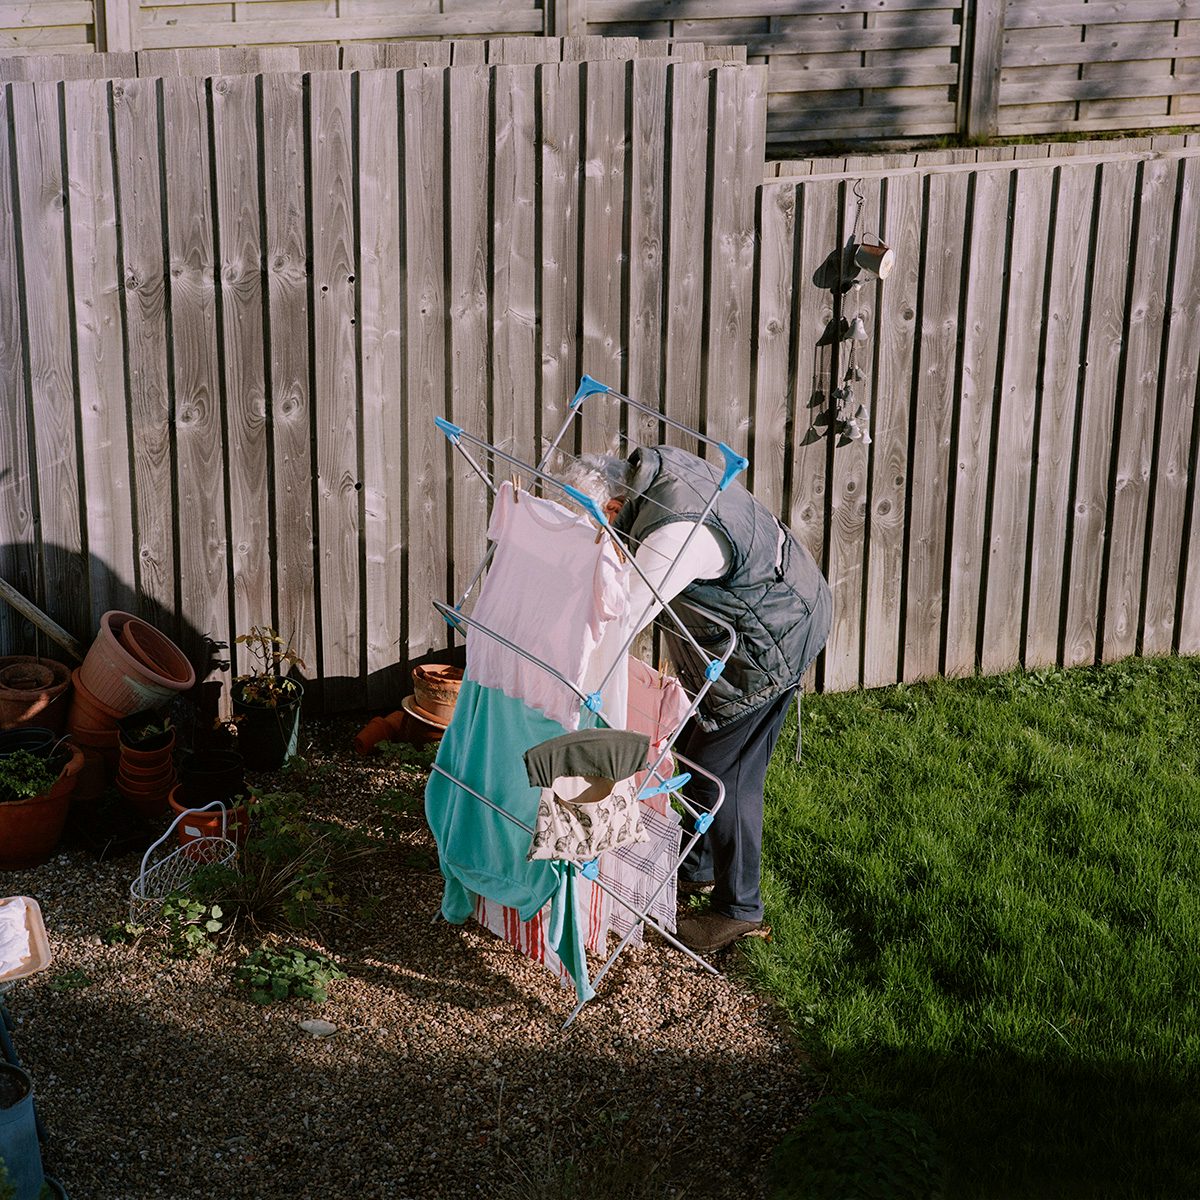 Image shows Pauline hanging out laundry in her garden, photographed by Taylor Wessing prize winner 2022, Clementine Schneidermann